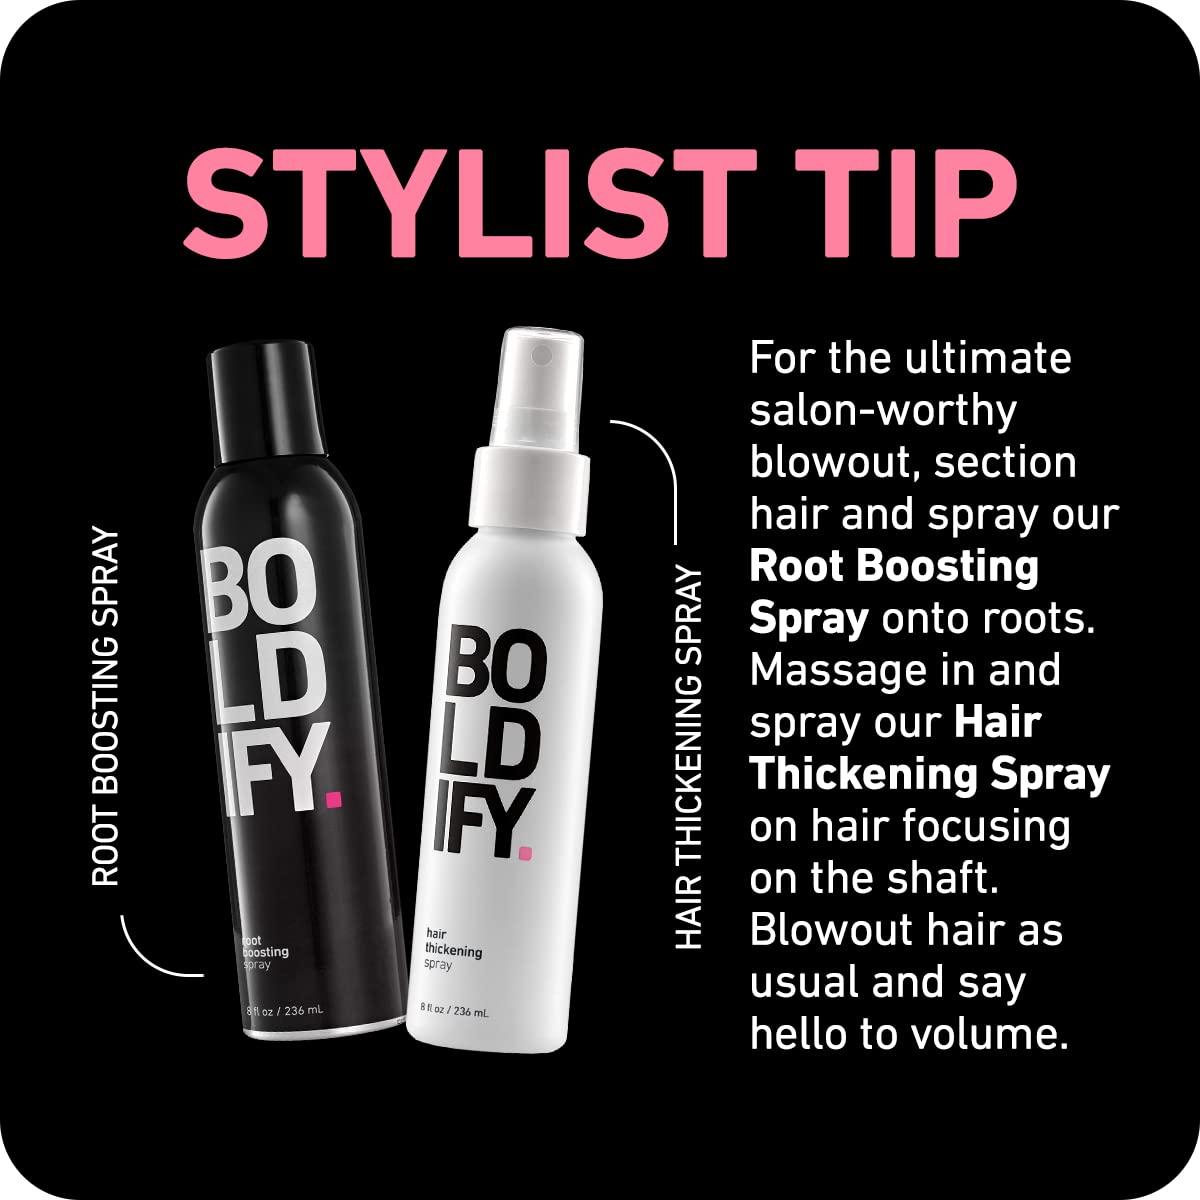 Boldify Hair Thickening Spray - Stylist Recommended Volumizing Hair Products All Genders - Hair Volumizer, Texture Spray for Hair, Hair Spray Women/Men, Hair Thickening Products for Women & Men - 8oz